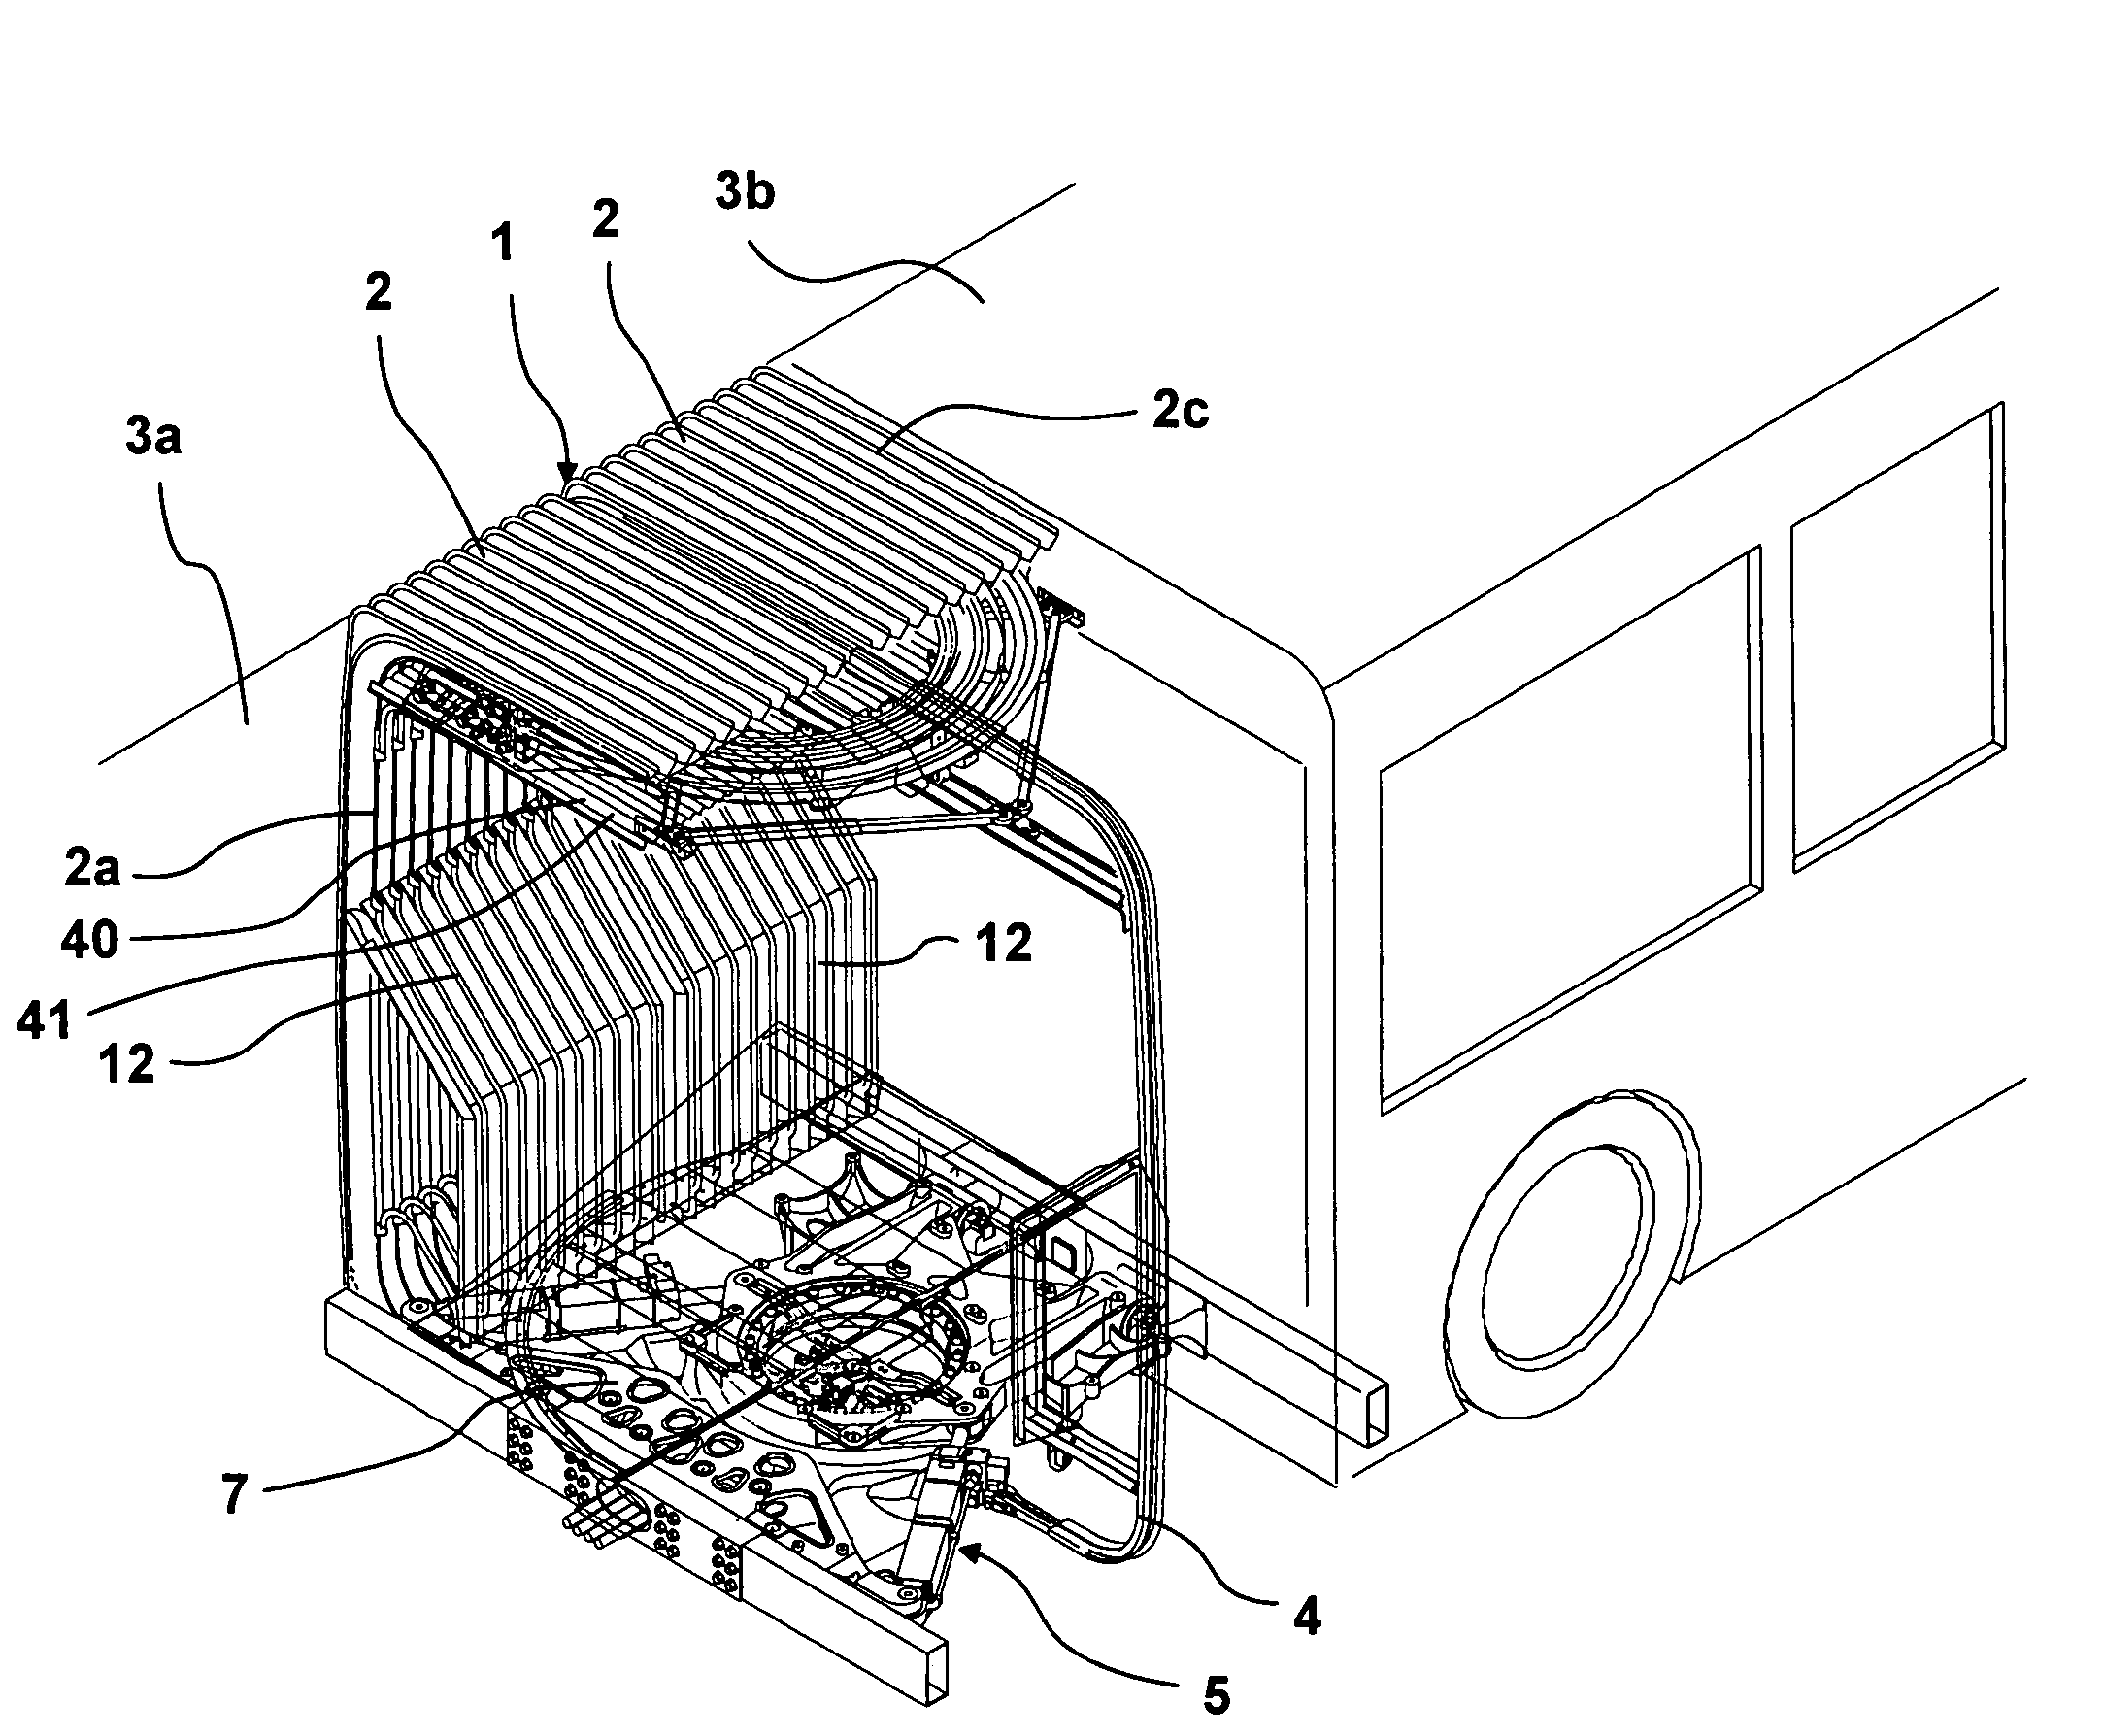 Apparatus for covering the track joint (track joint cover) between the rotary plate and the bellows of a connection between two hinge-linked vehicle sections